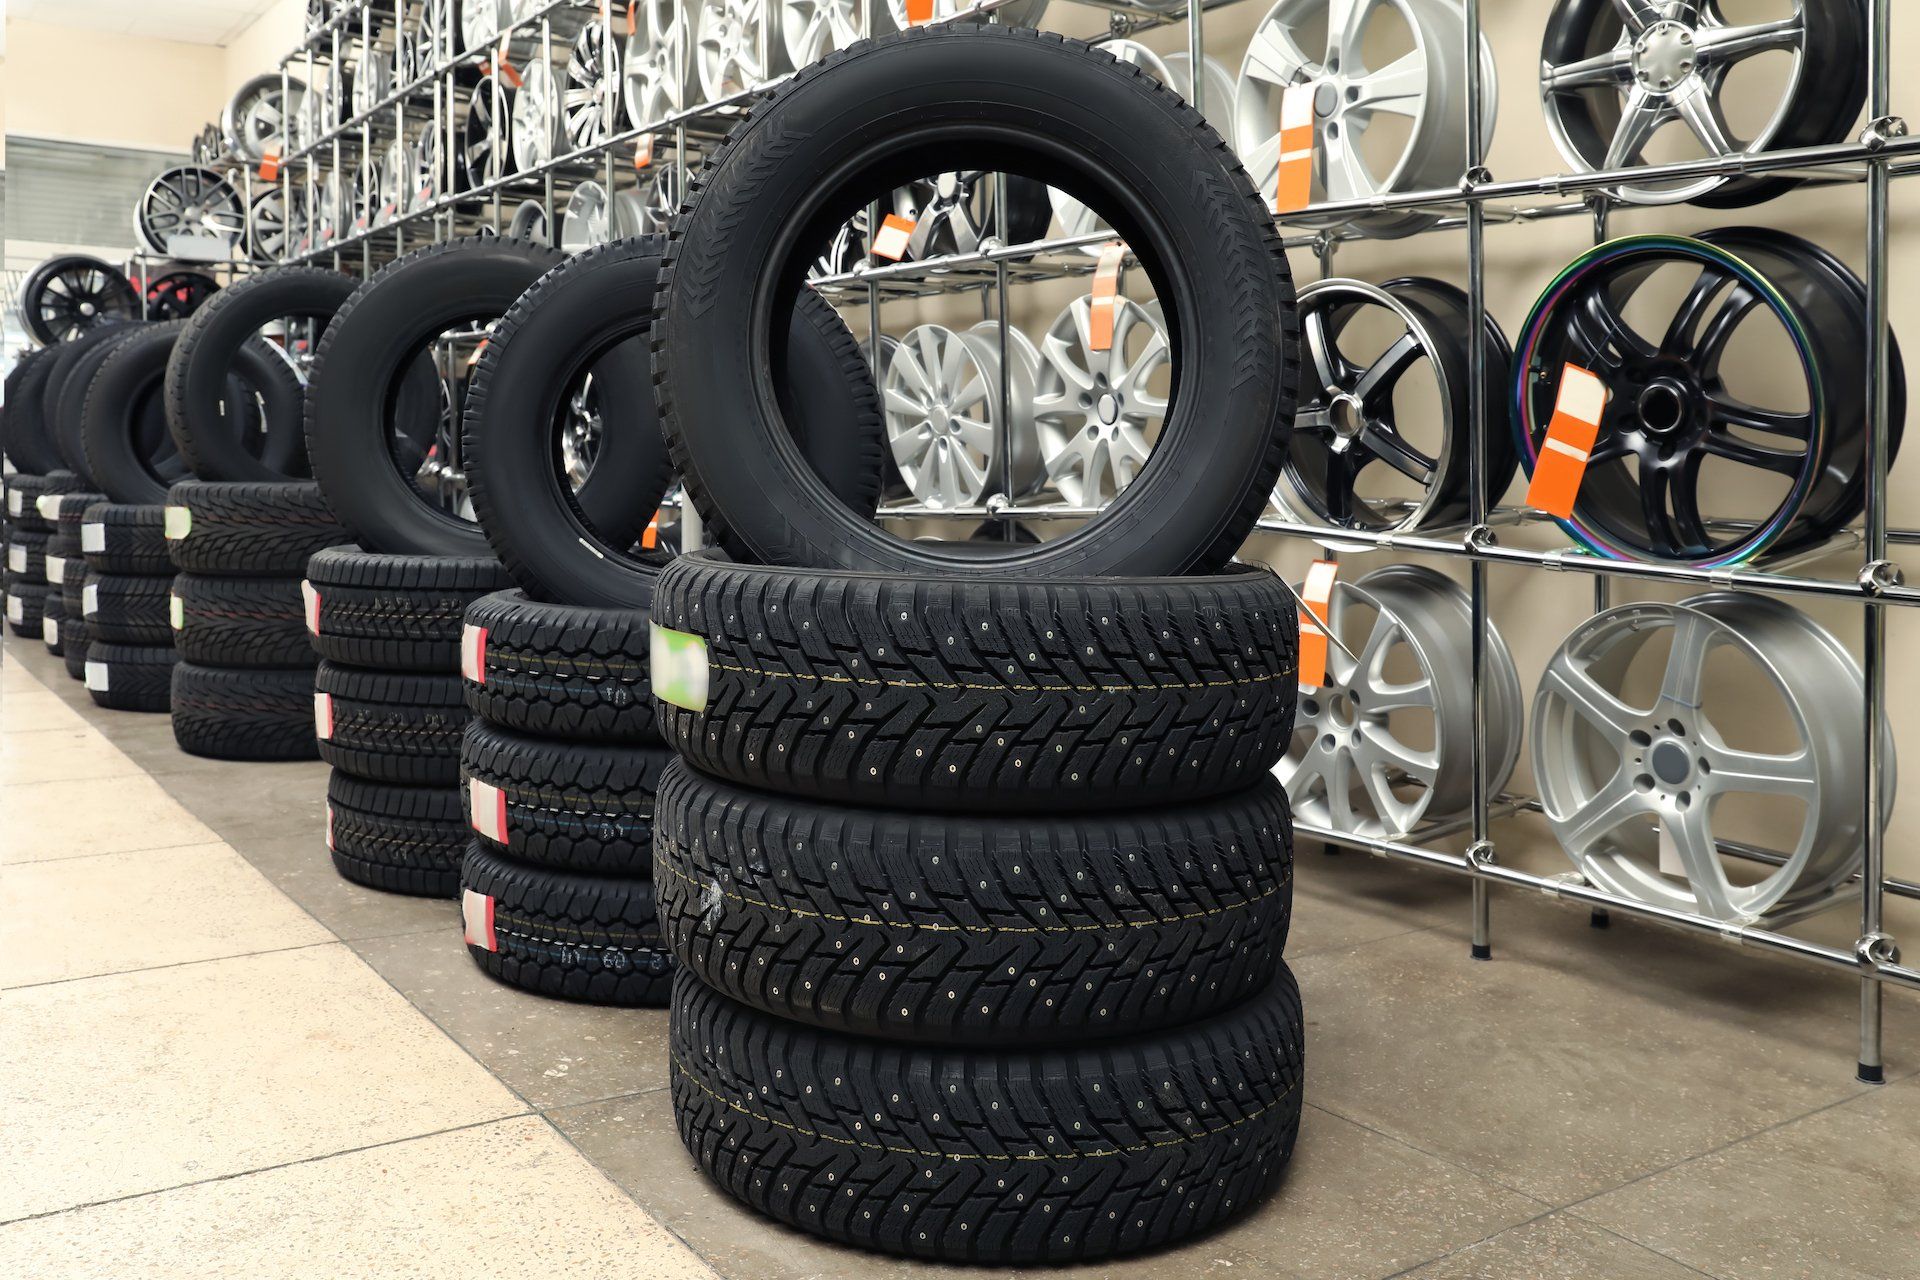 A bunch of tires are stacked on top of each other in a store.